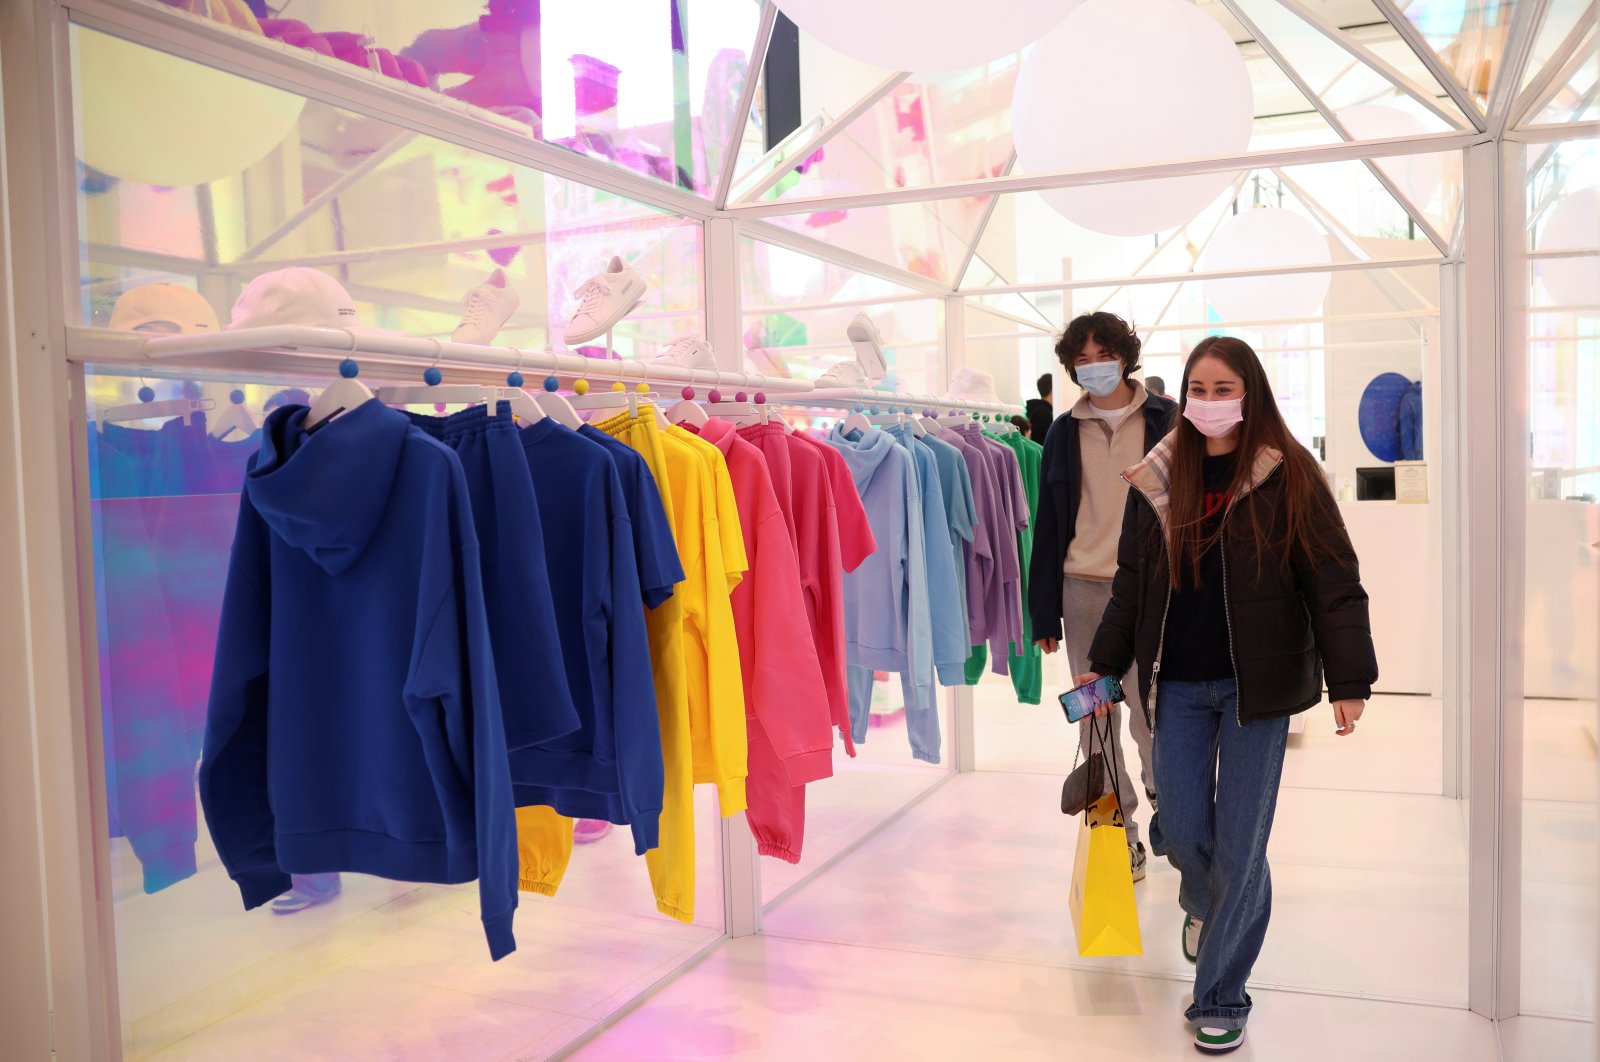 People shop in Selfridges department store on Oxford street, as the coronavirus disease (COVID-19) restrictions ease, in London, Britain, April 12, 2021. (Reuters Photo)